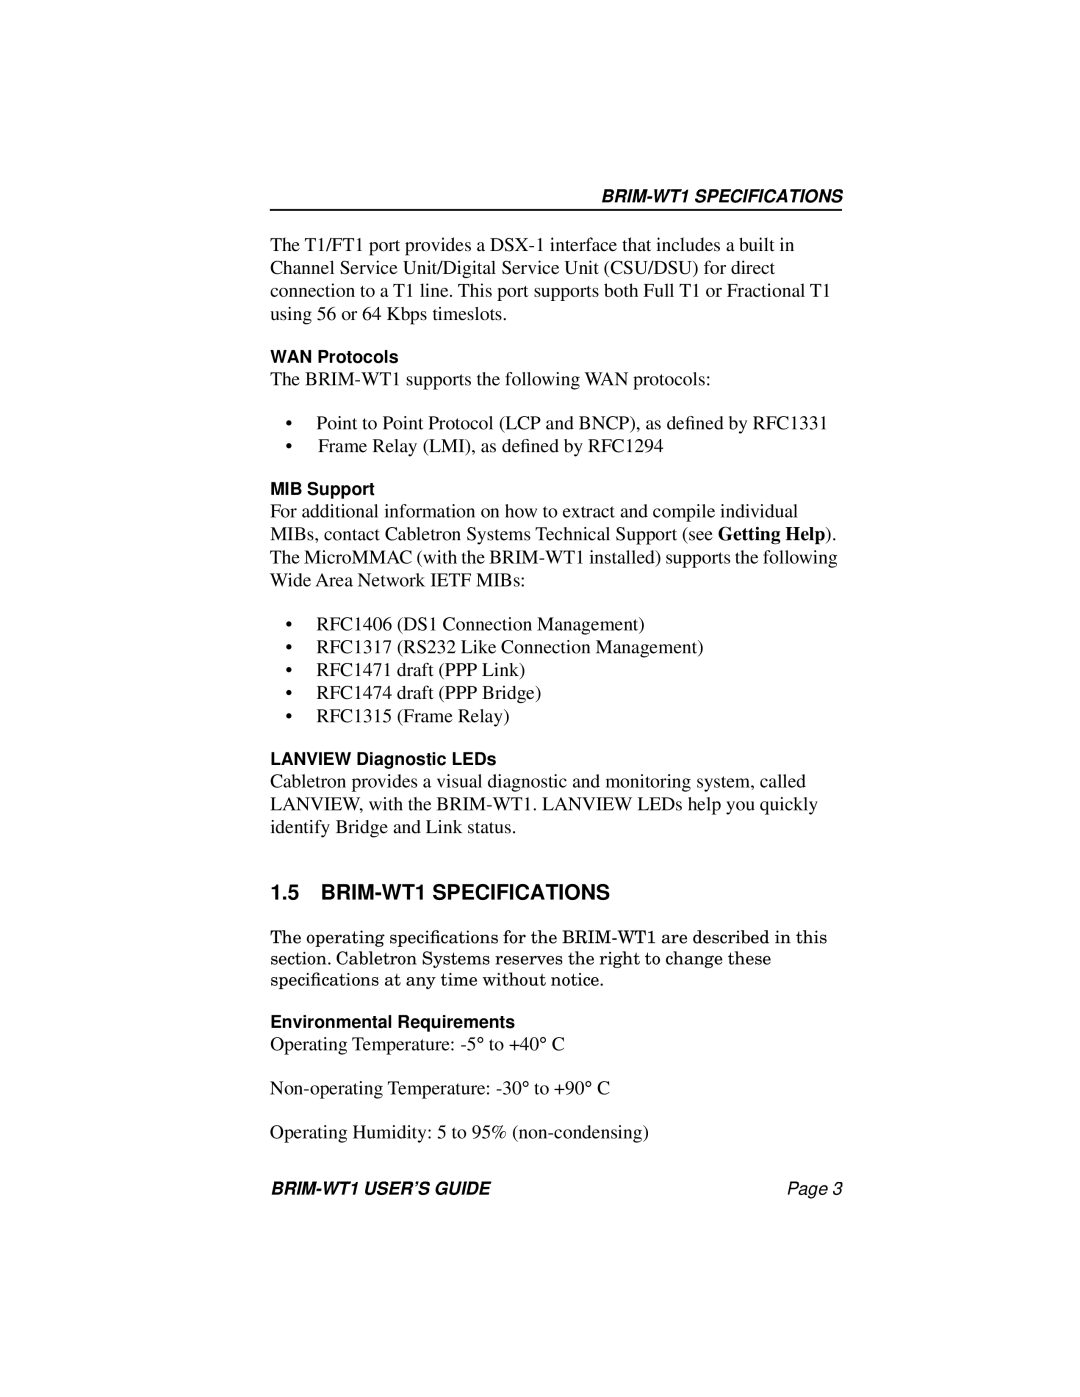 Cabletron Systems manual BRIM-WT1 SPECIFICATIONS 